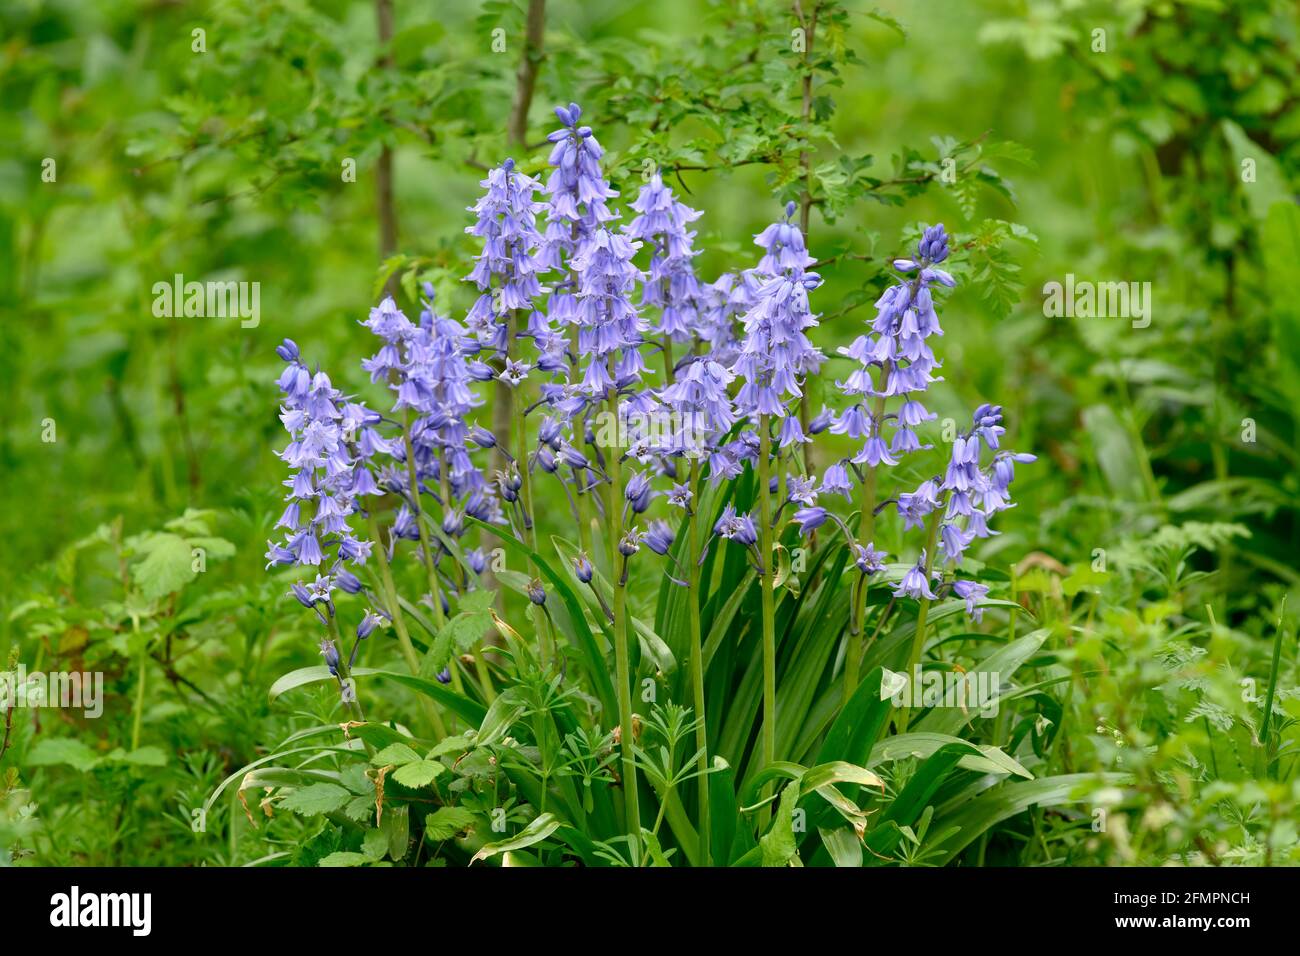 A clump of Bluebell flowers (Hyacinthoides non-scripta) photographed against a green foliage background Stock Photo